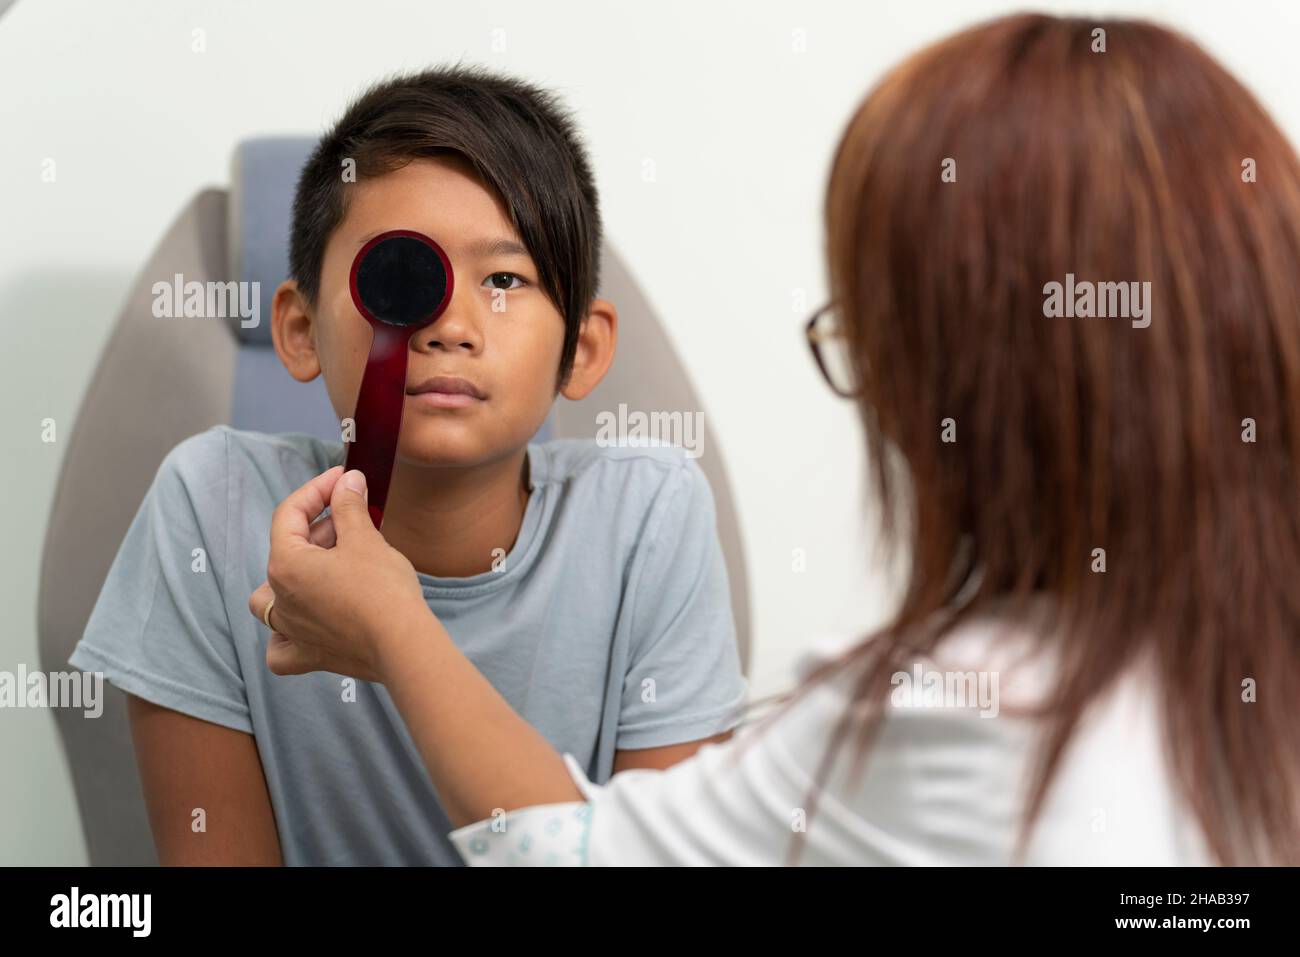 Asian boy in a consultation of an ophthalmologist woman Stock Photo